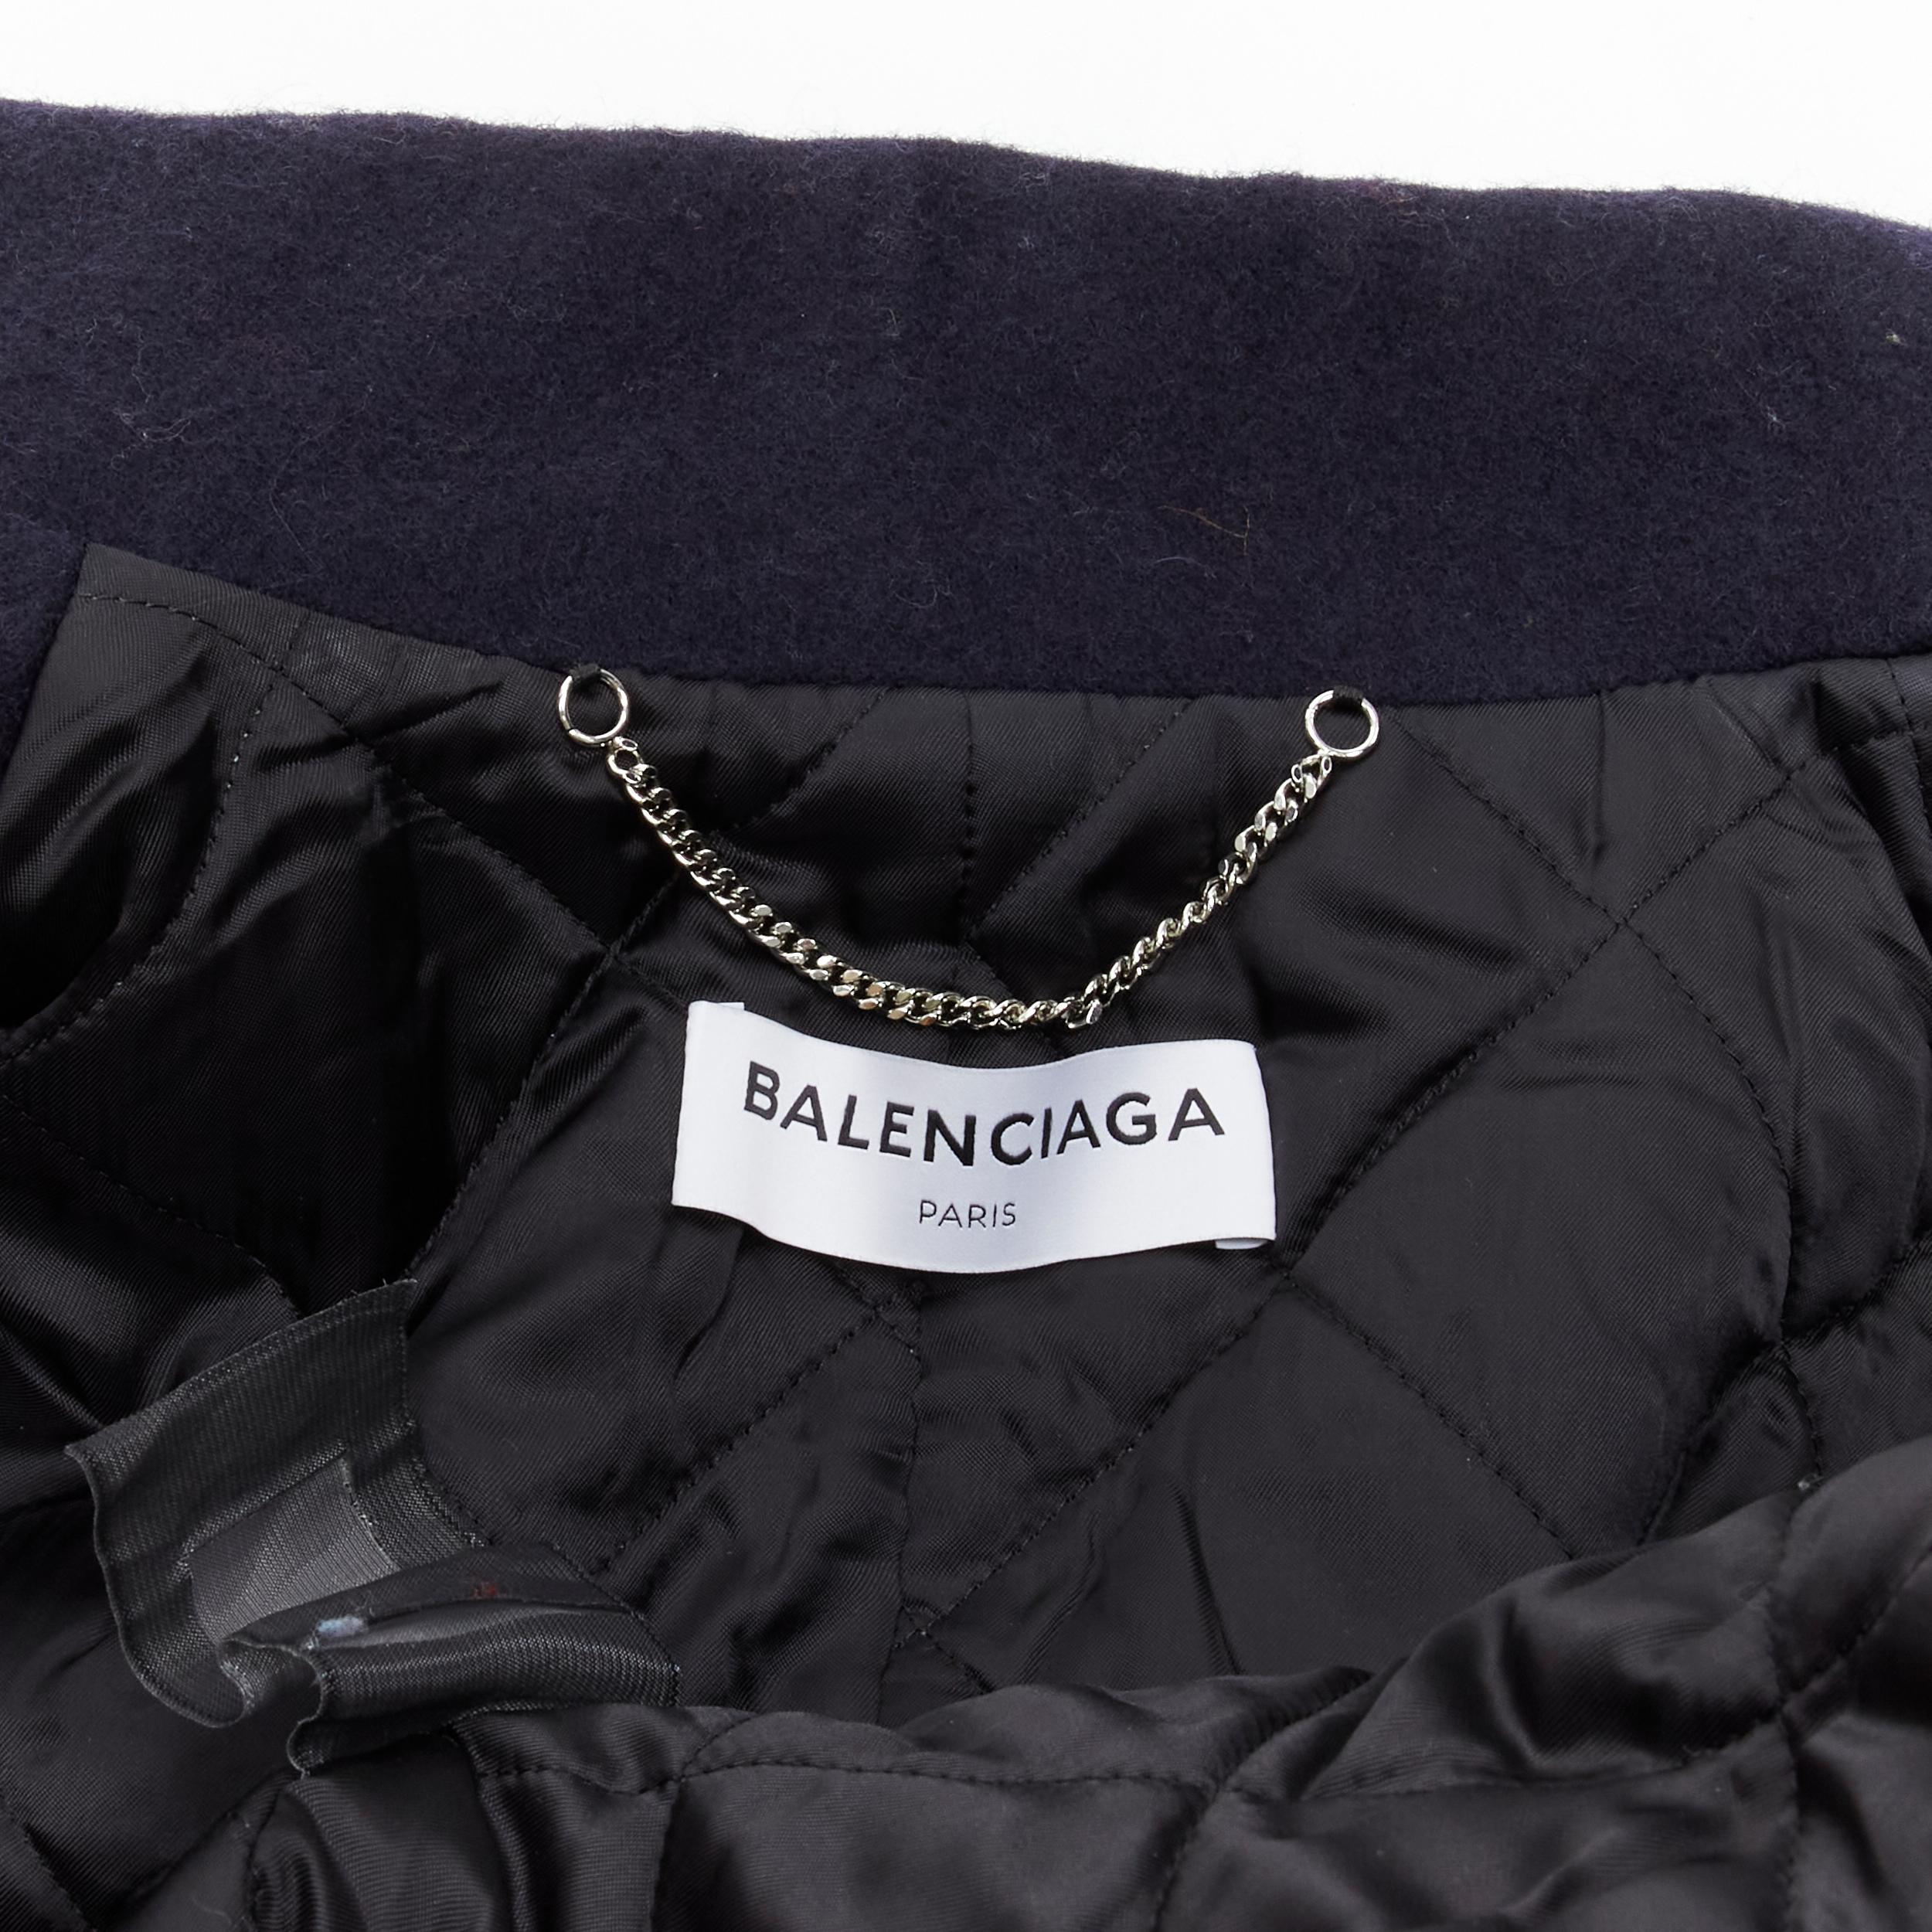 BALENCIAGA 2018 Wrap navy wool deconstructed double breasted coat M 2